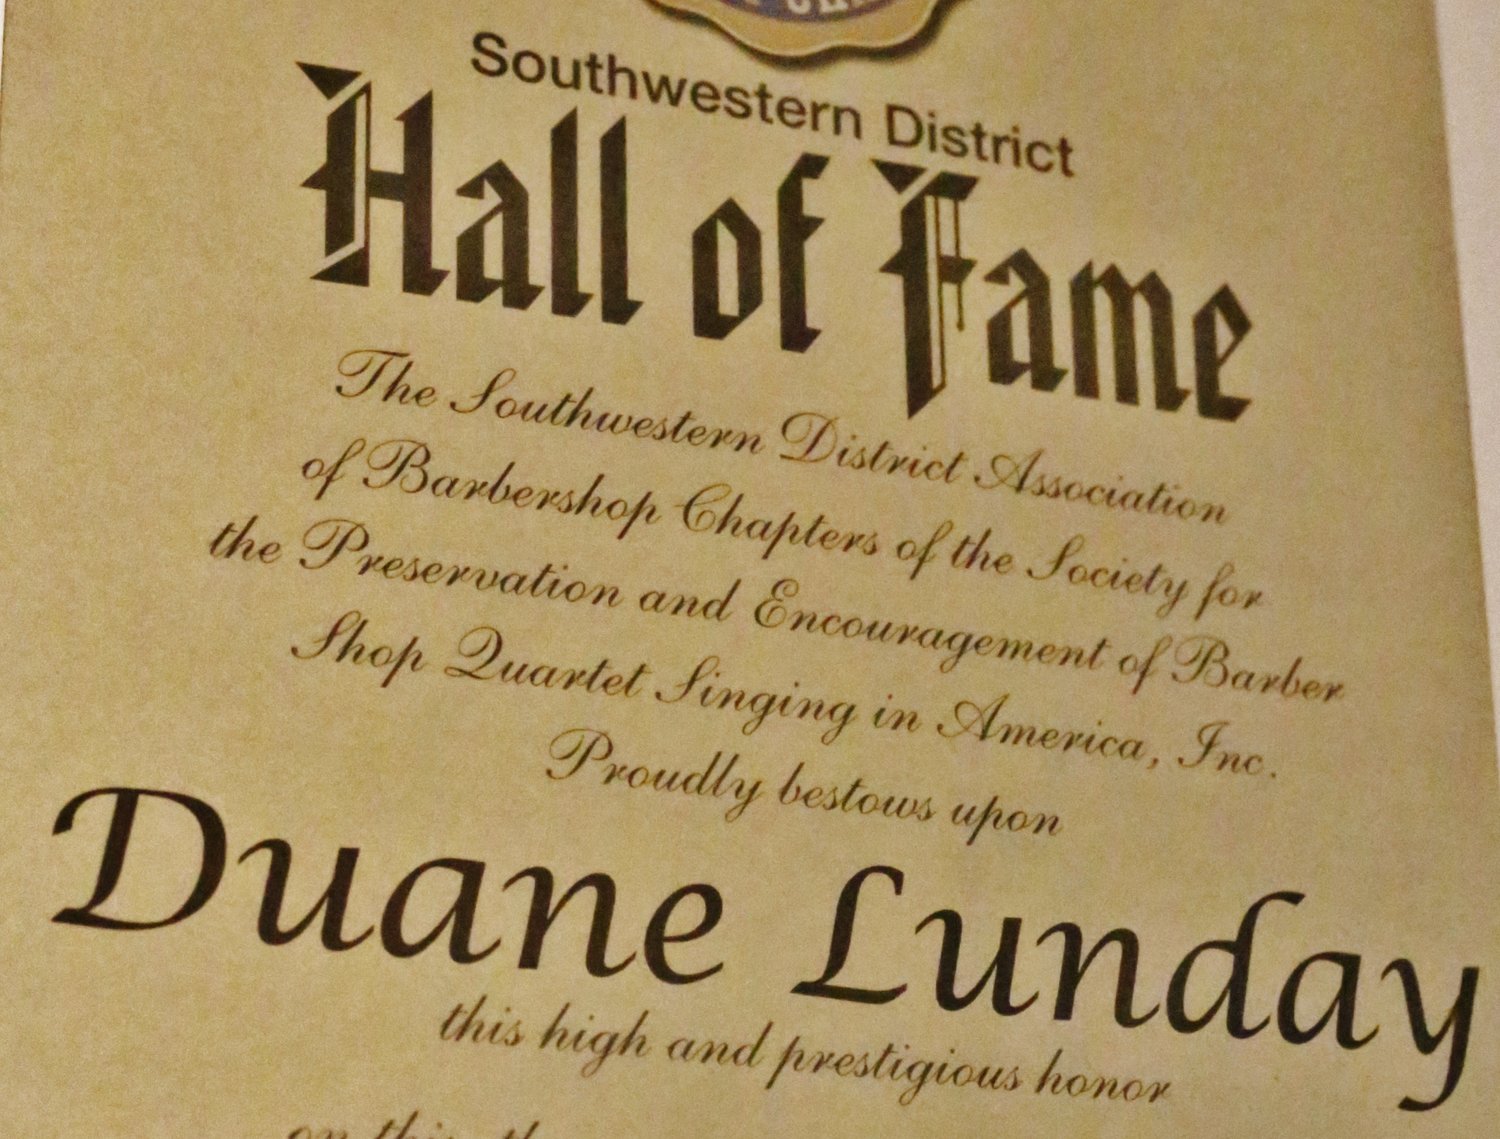 Lunday’s certificate of election to the SPEBSQSA Hall of Fame.